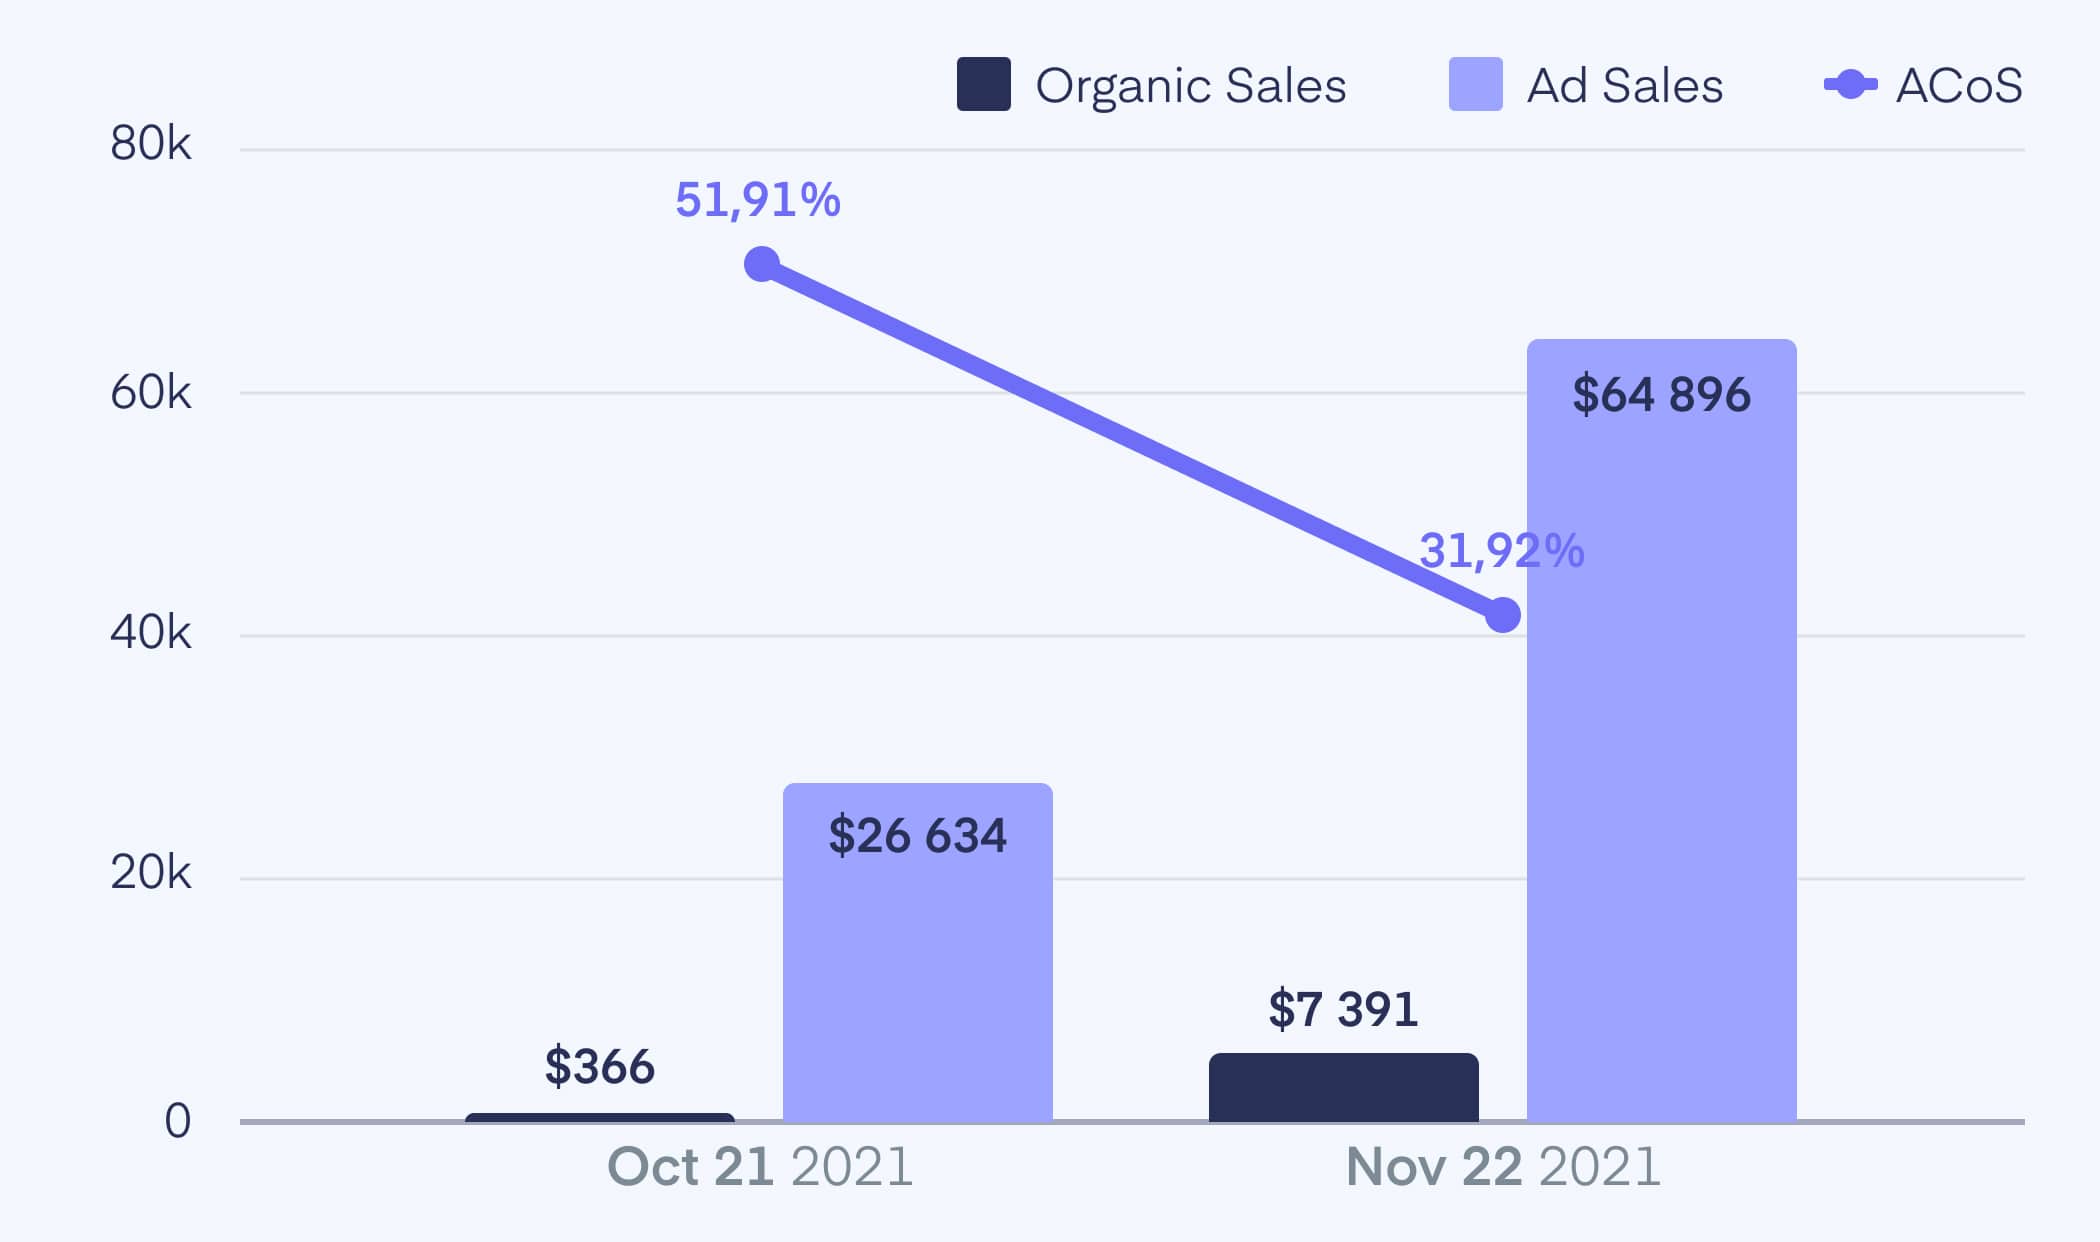 Increase of Organic Sales and Ad Sales